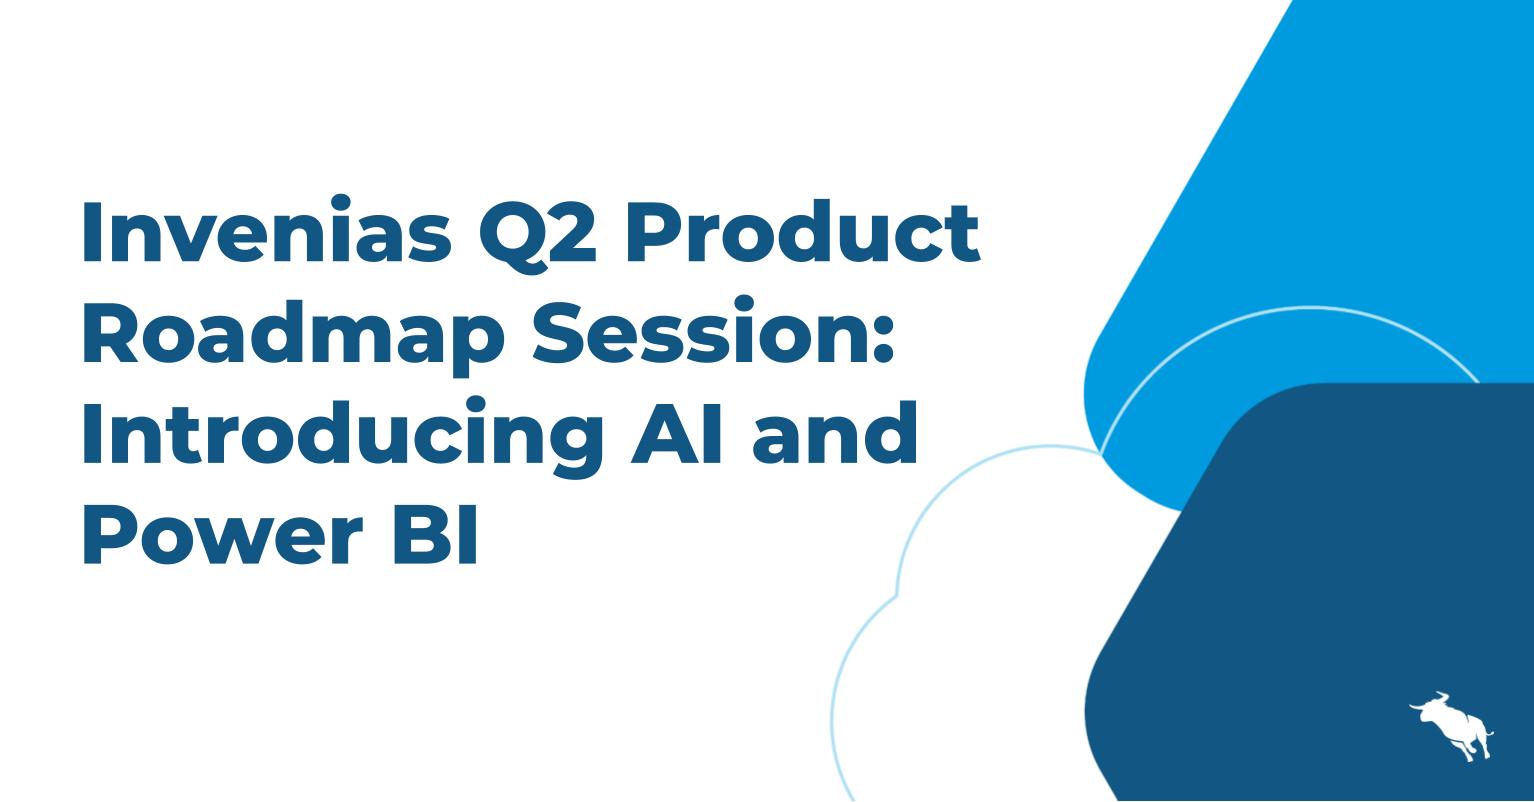 Invenias Q2 Product Roadmap Session: Introducing AI and Power BI